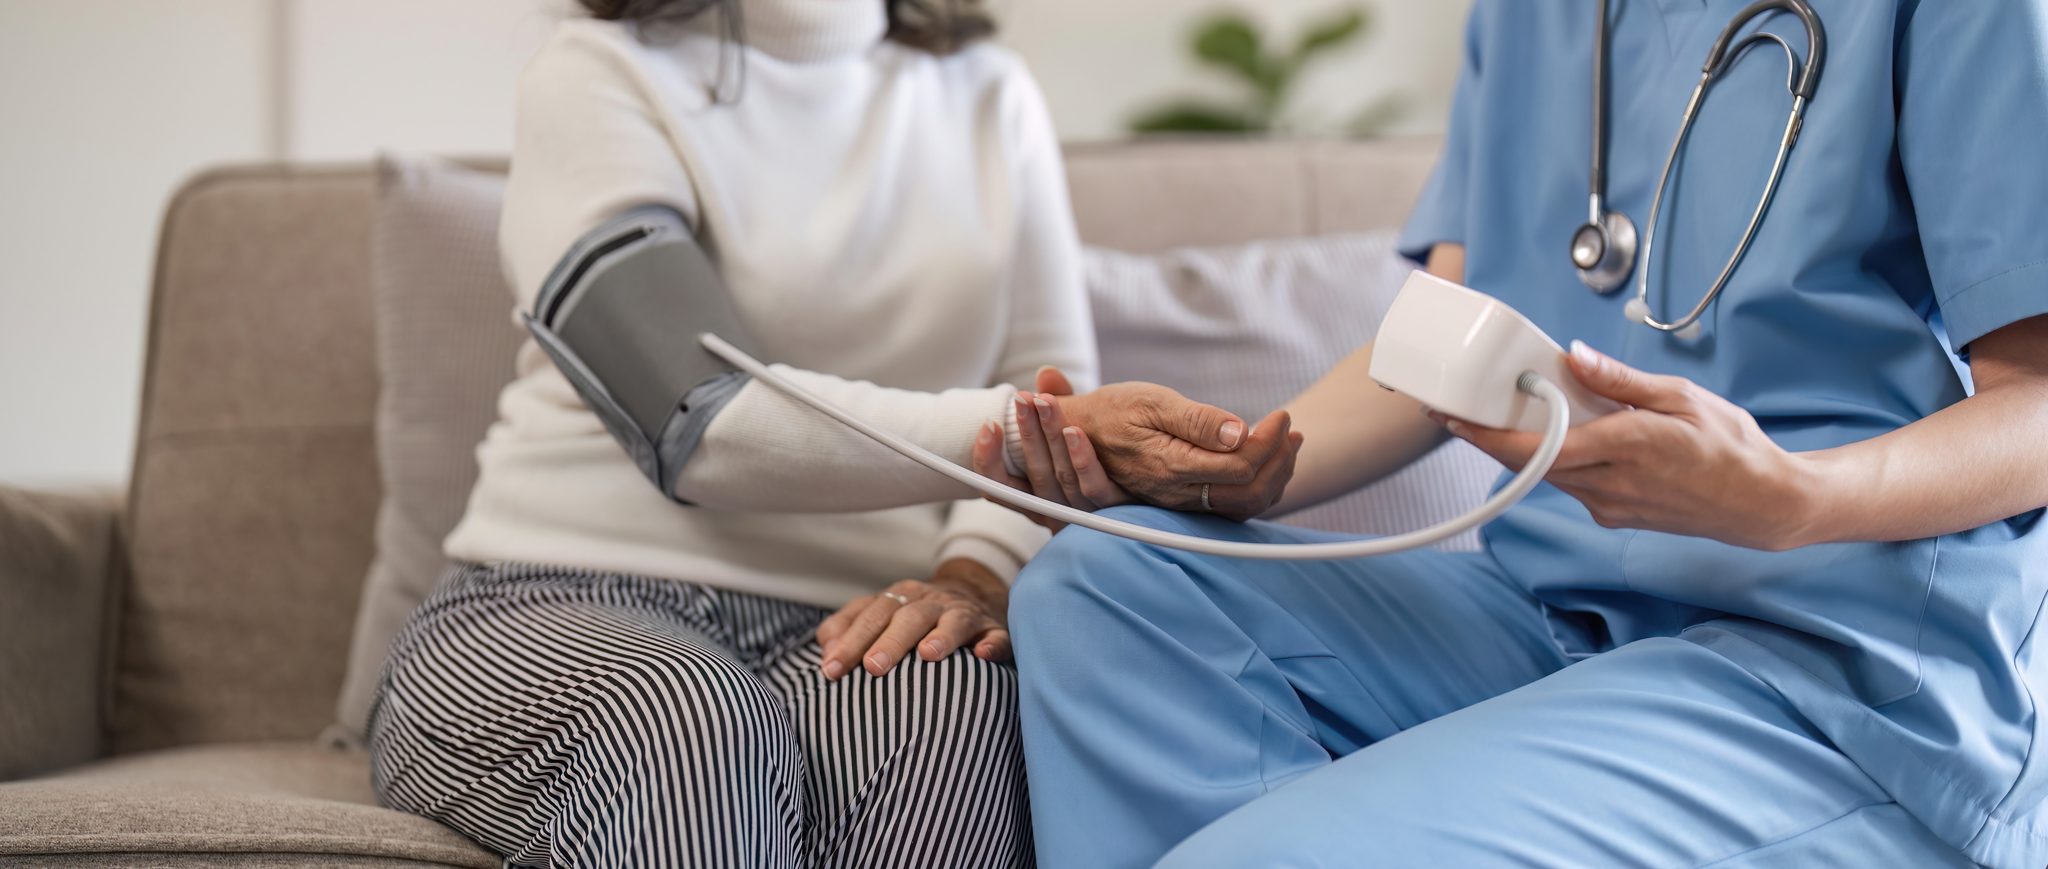 Pflege 2030 - How Can Technologies Relieve Caregivers?